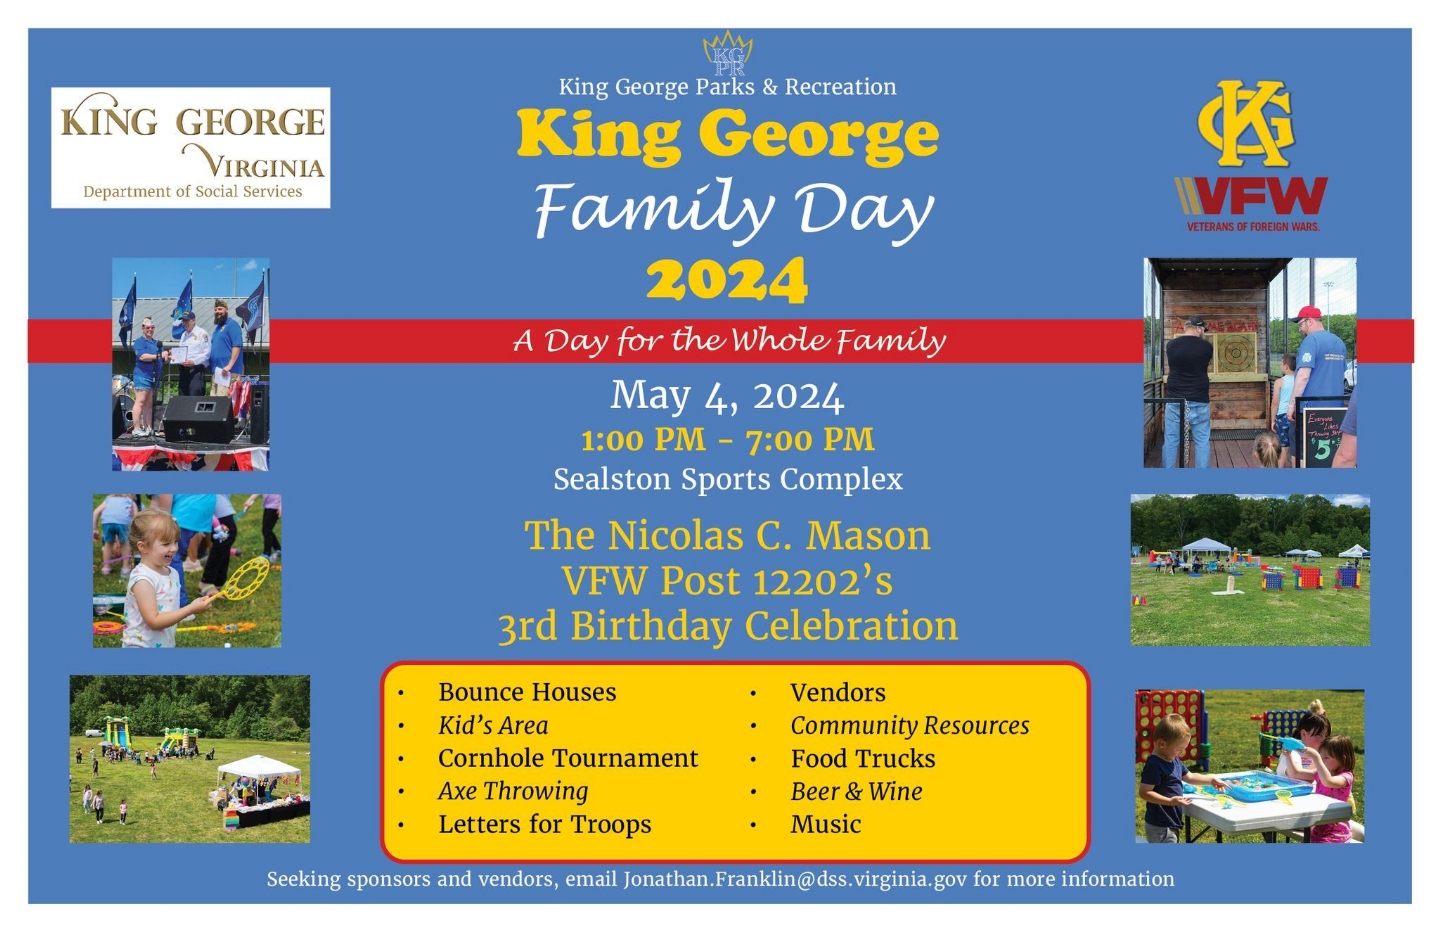 <h1 class="tribe-events-single-event-title">3rd Birthday Celebration and King George Family Day</h1>